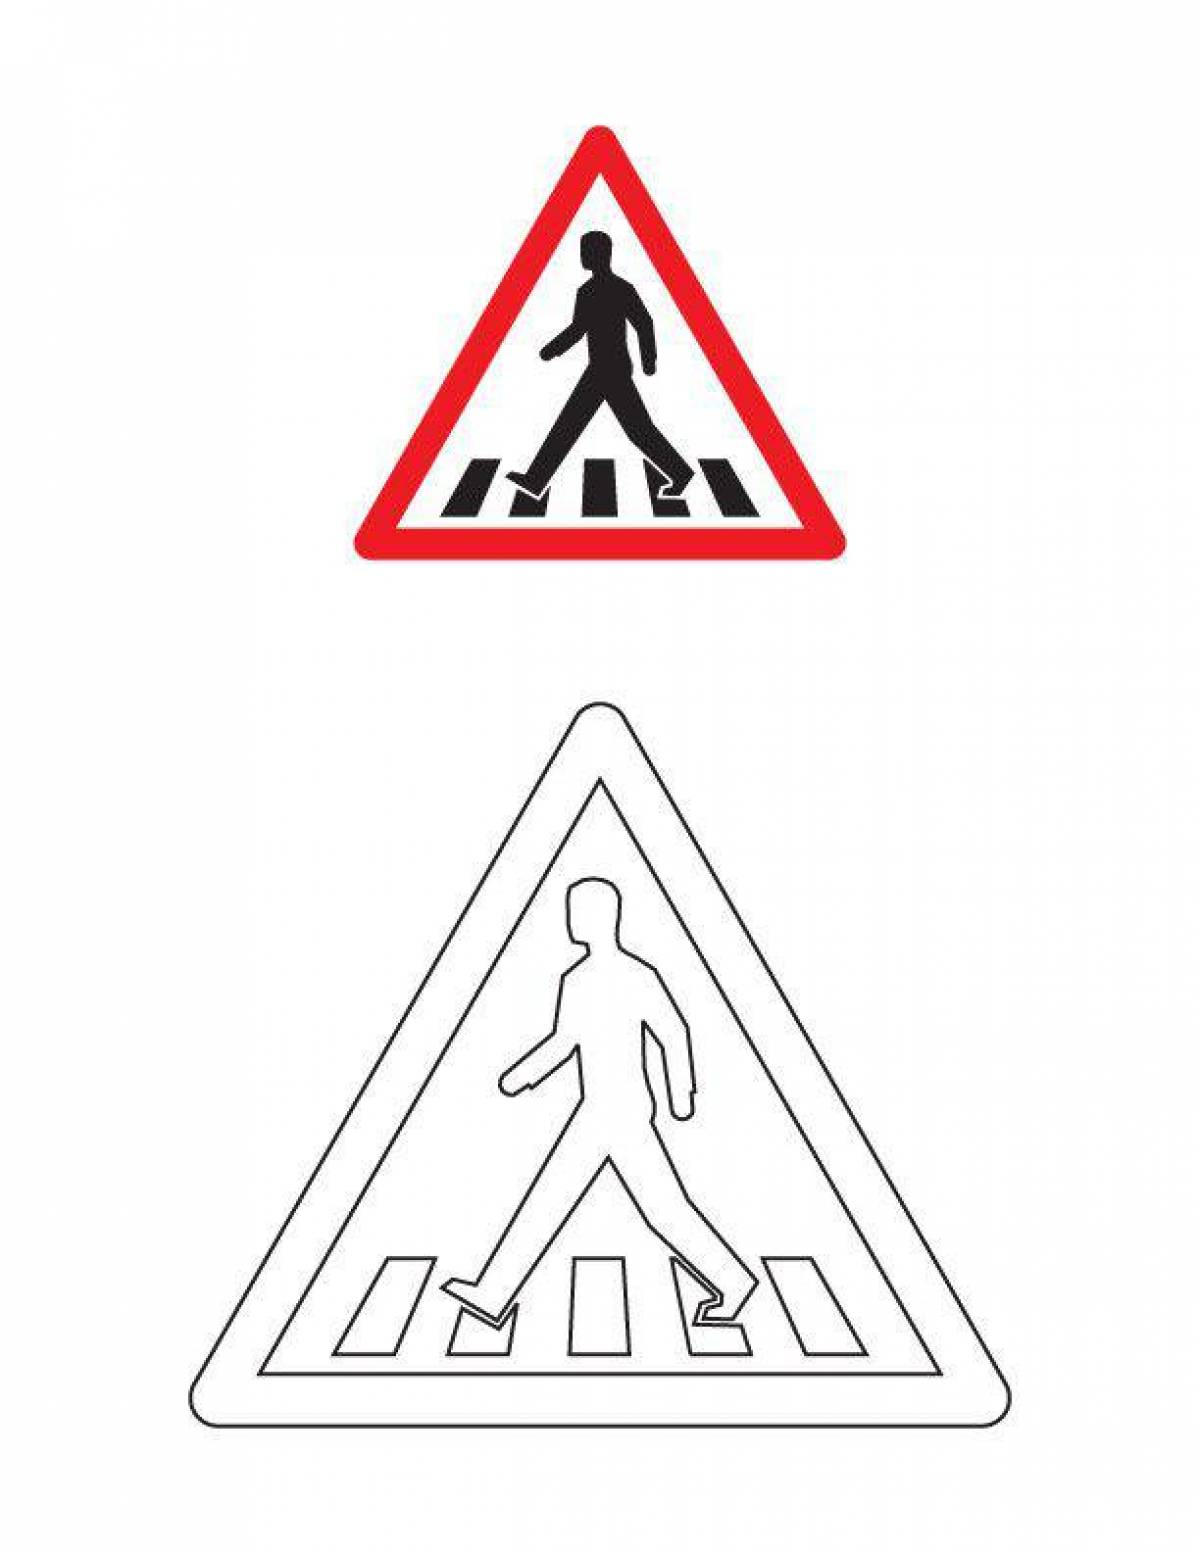 Coloring page shiny crosswalk sign